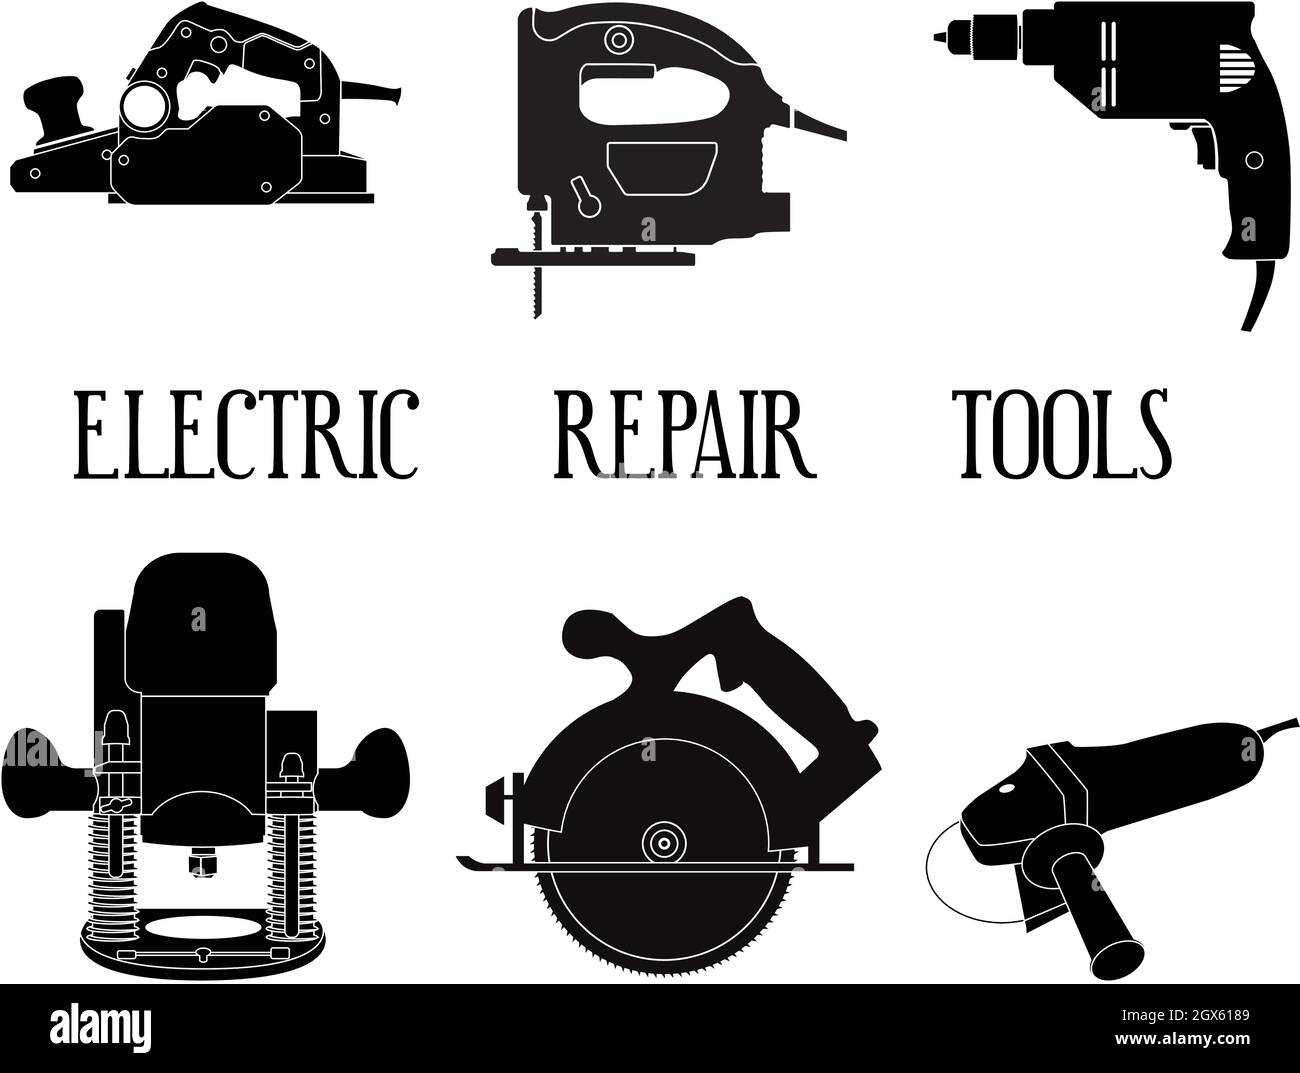 Electric repair tools set silhouette vector illustration isolated Stock Vector